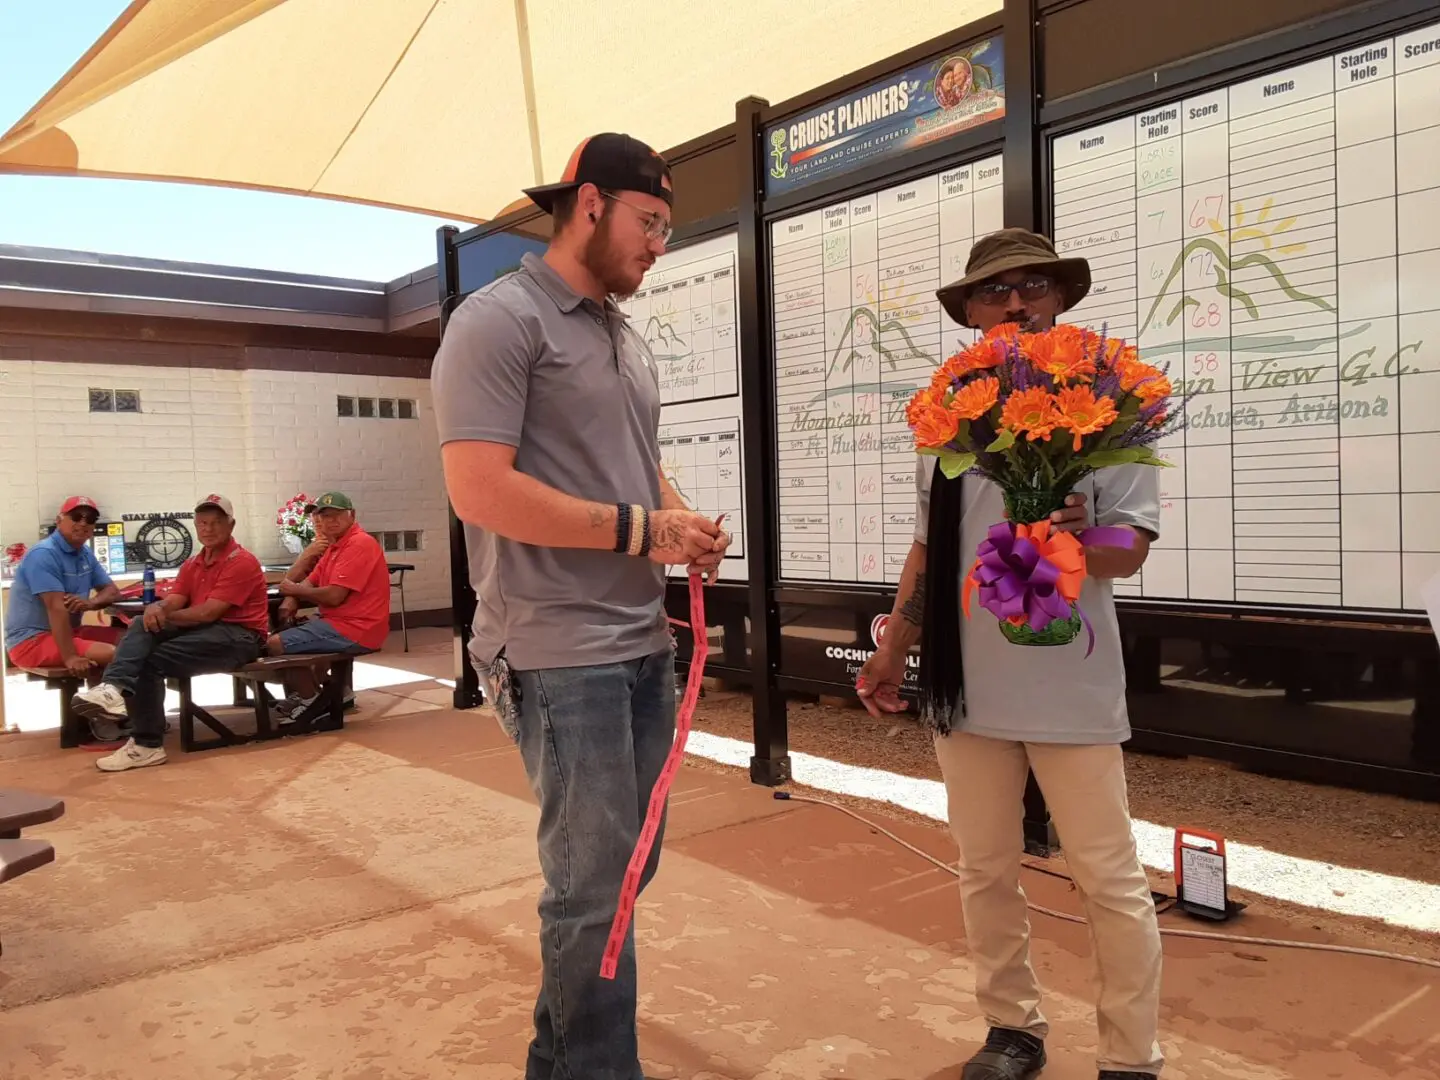 A man standing next to another man holding flowers.